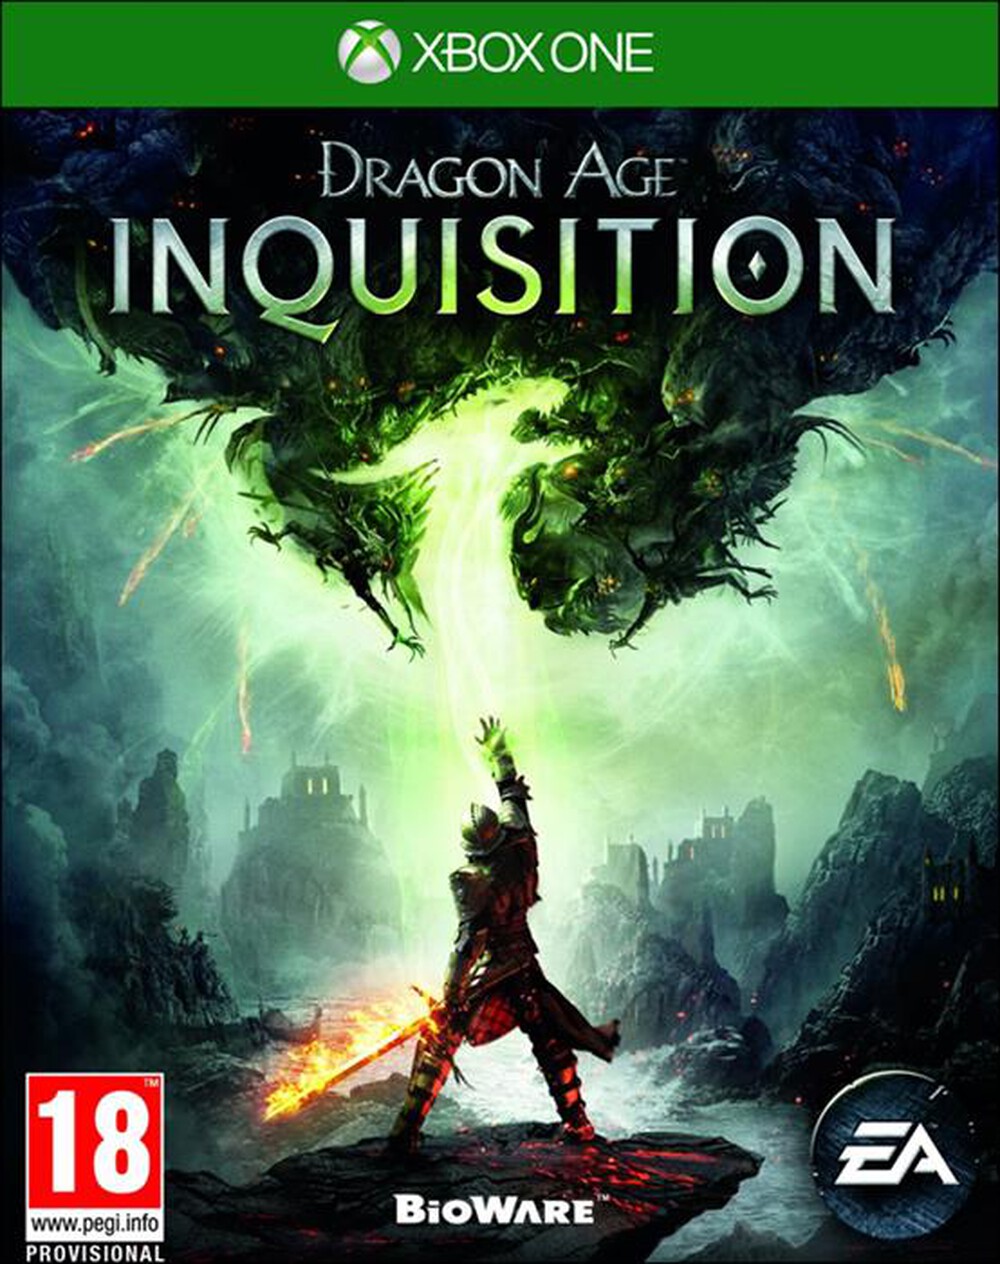 "ELECTRONIC ARTS - Dragon Age Inquisition Xbox One - "